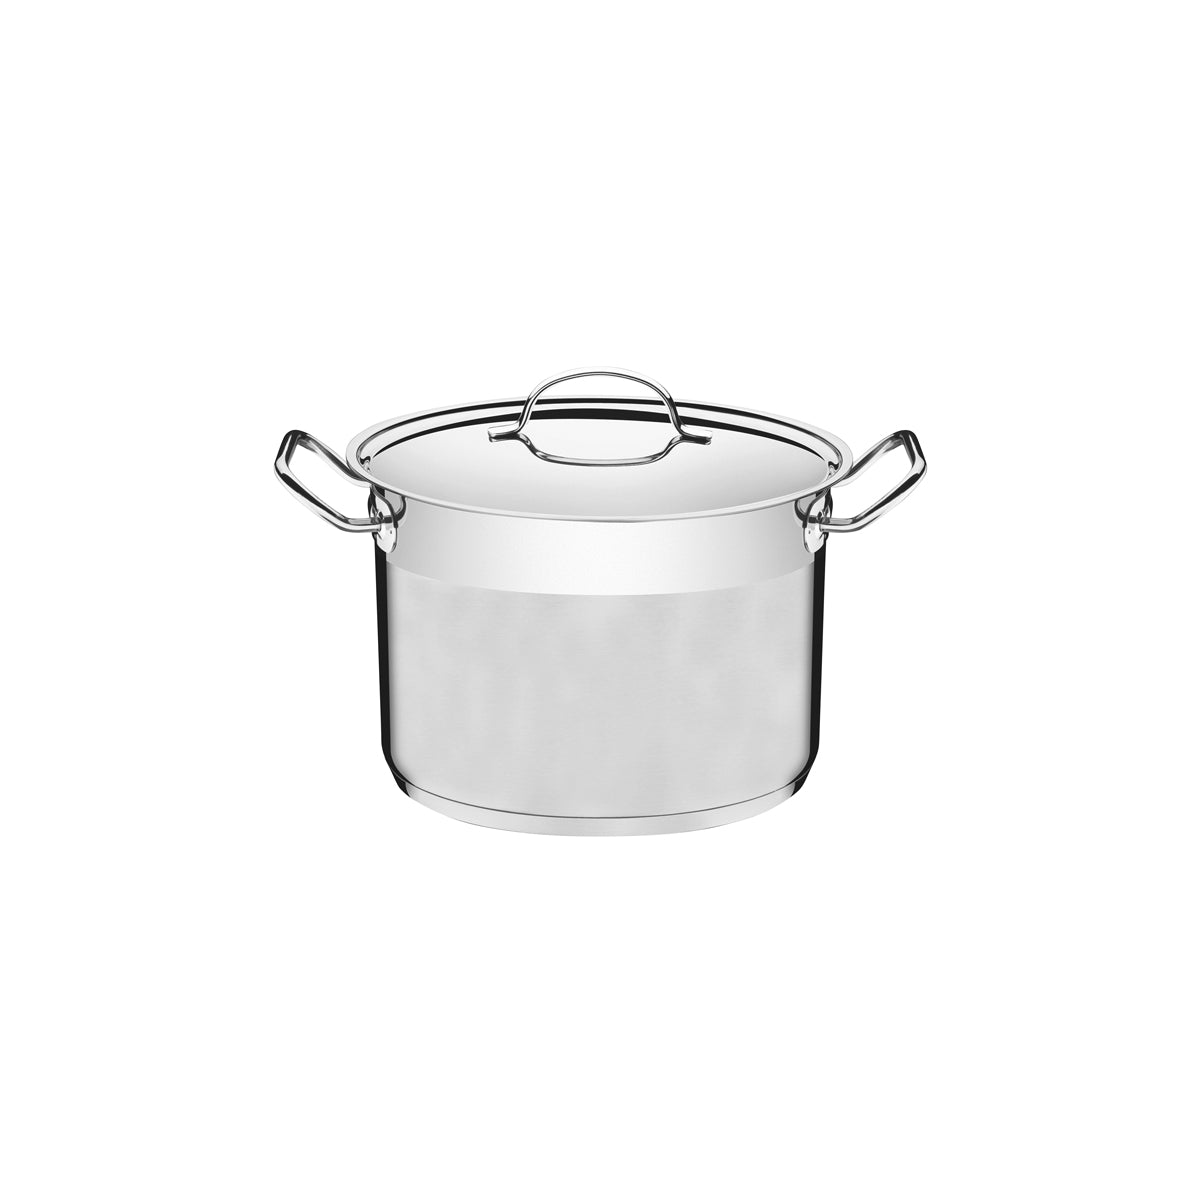 TM62625/201 Tramontina Professional Stock Pot with Lid Stainless Steel 200mm Tomkin Australia Hospitality Supplies